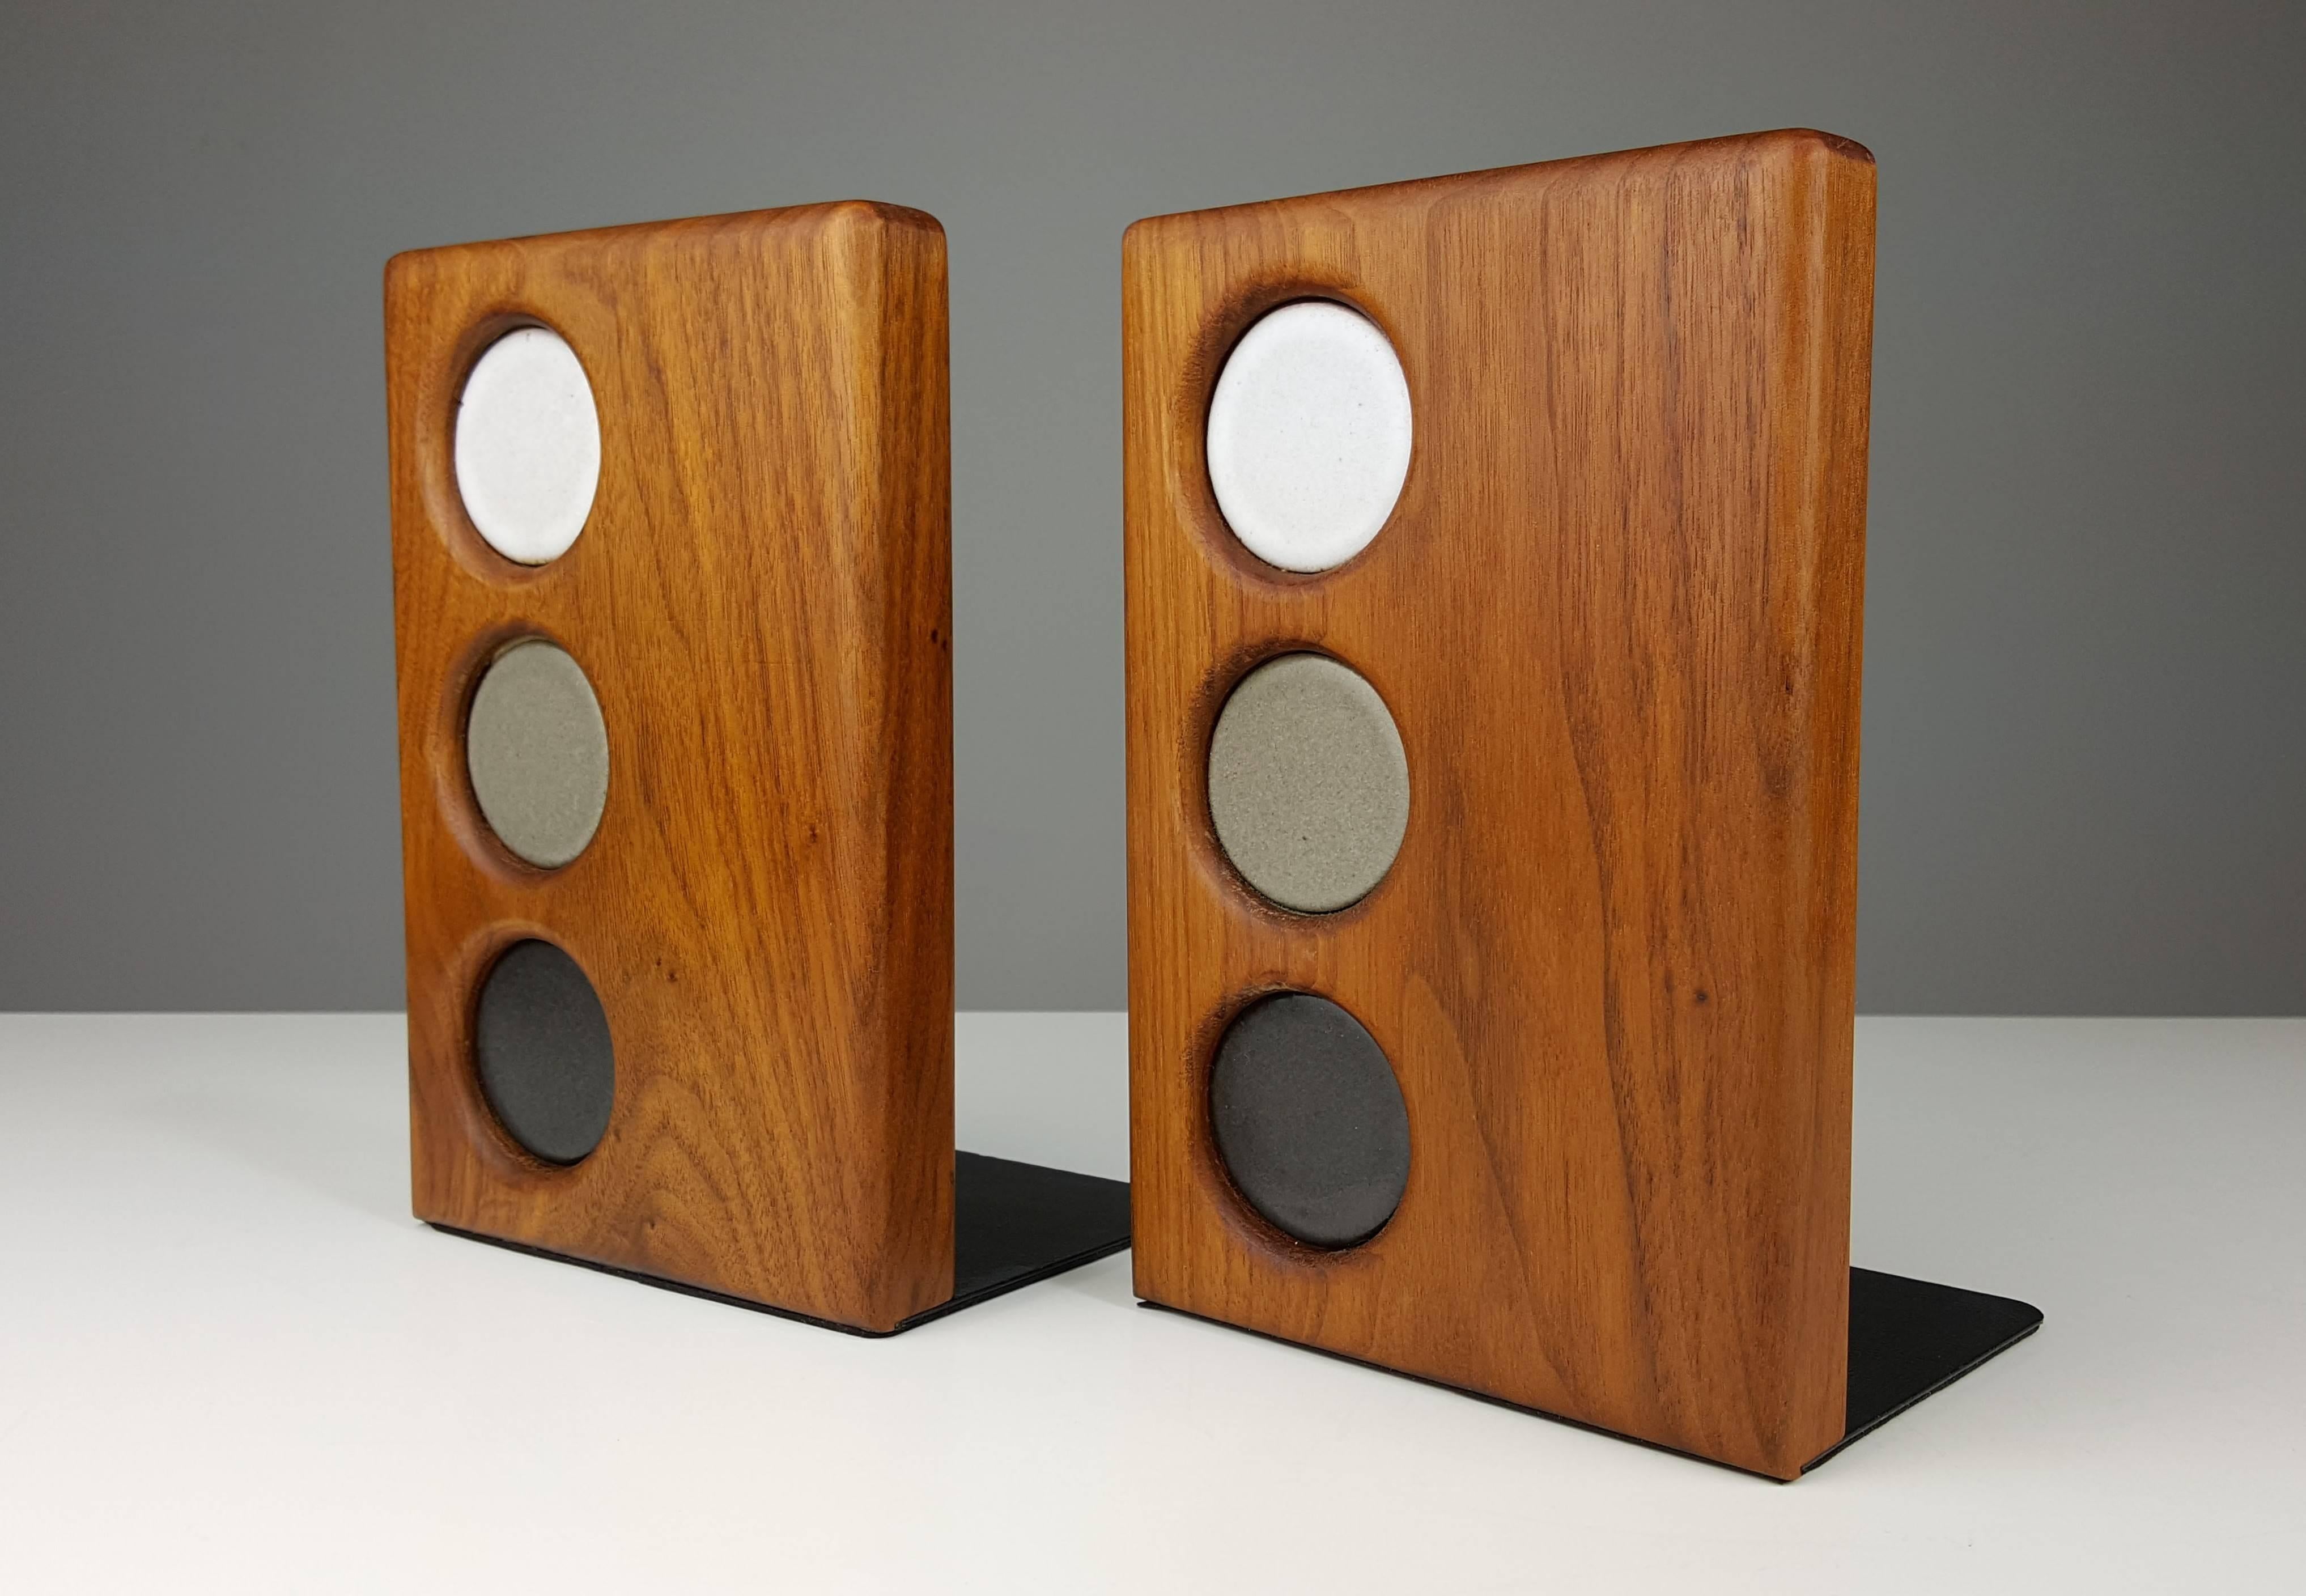 Beautiful walnut and ceramic bookends by Gordon and Jane Martz for Marshall Studios, 1950s.